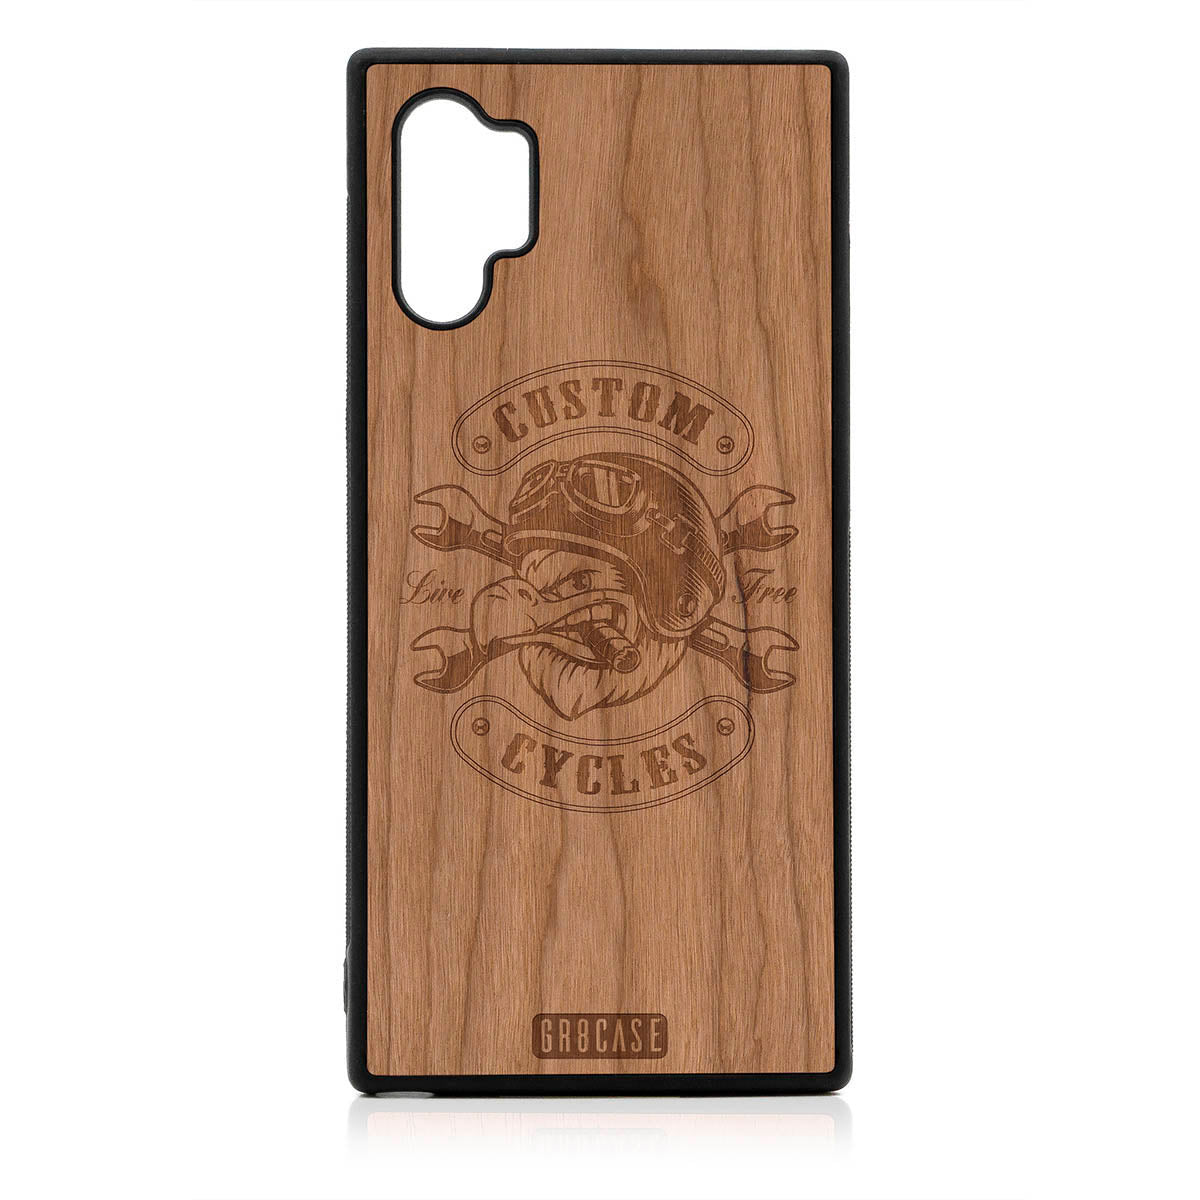 Custom Cycles Live Free (Biker Eagle) Design Wood Case For Samsung Galaxy Note 10 Plus by GR8CASE